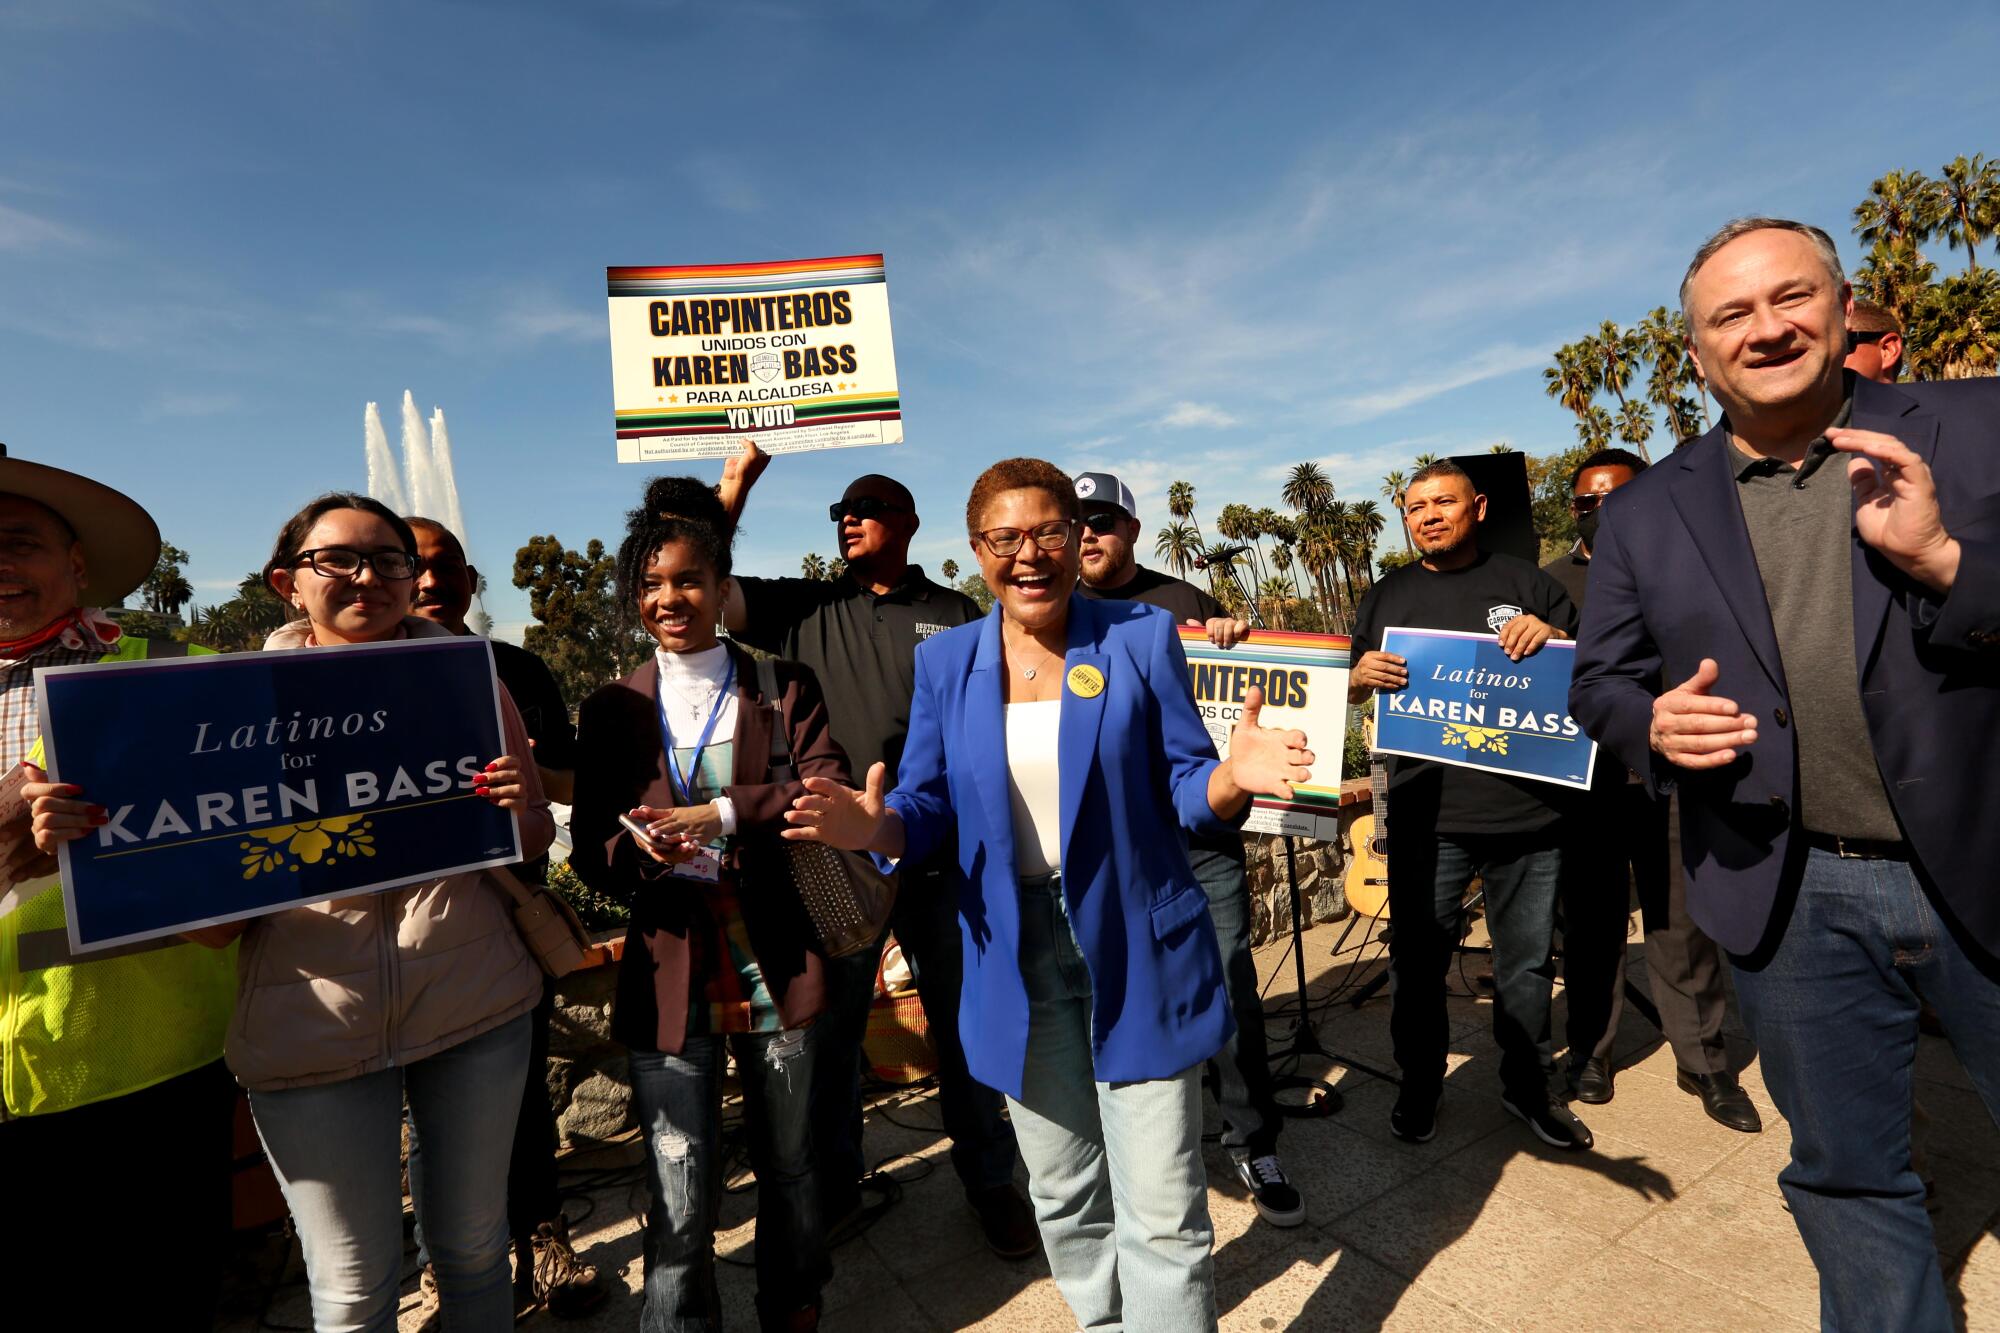 Rep. Karen Bass, center, in a crowd of people holding signs